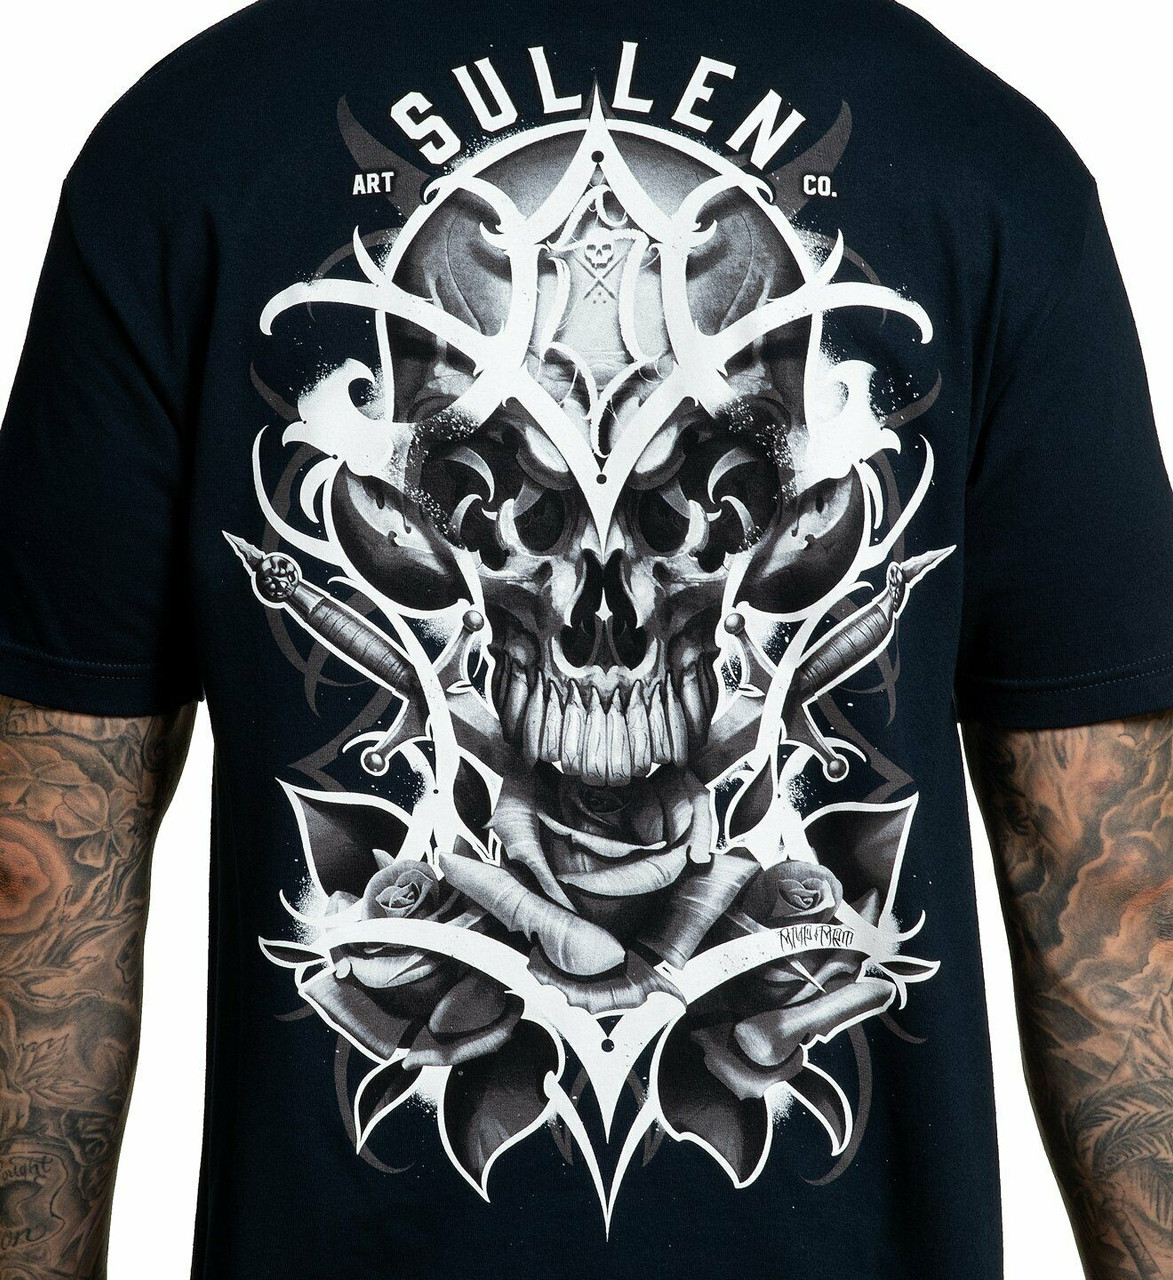 Graphic TShirts Men  Tattoo Tee Shirts  Funny T Shirts for Guys  Inked  Shop